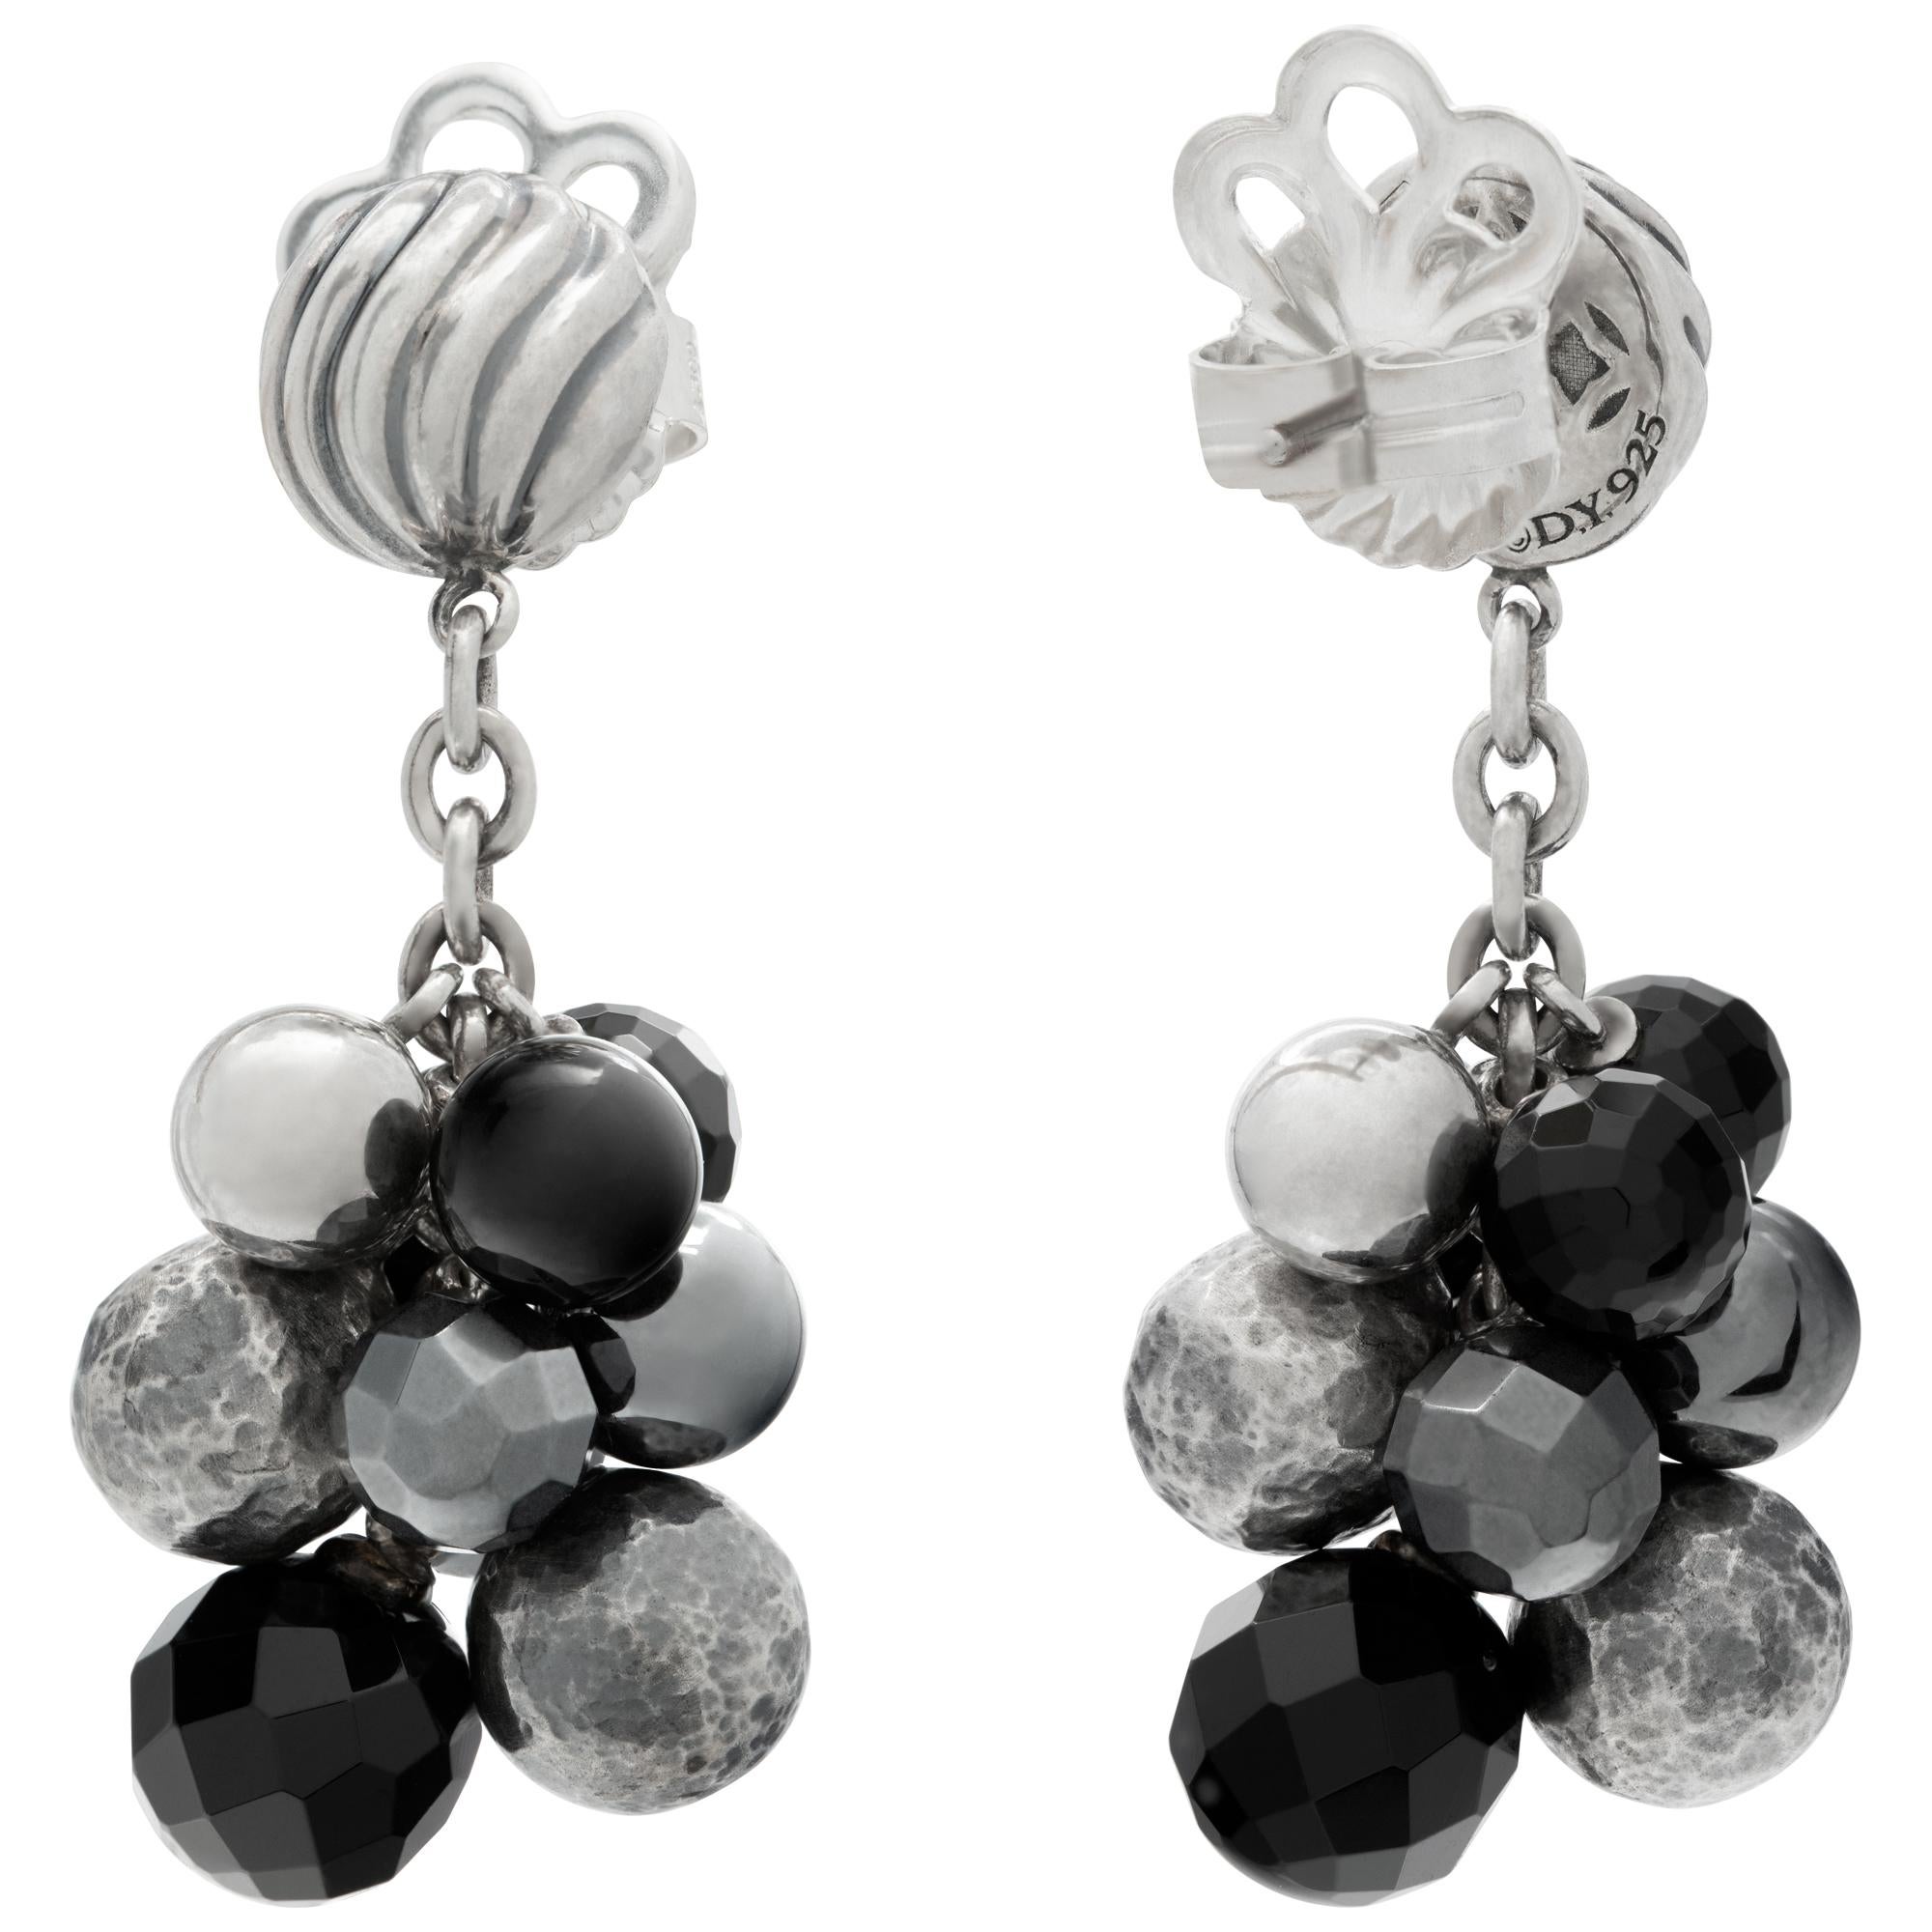 David Yurman earrings in sterling silver with sterling silver and onyx balls In Excellent Condition For Sale In Surfside, FL